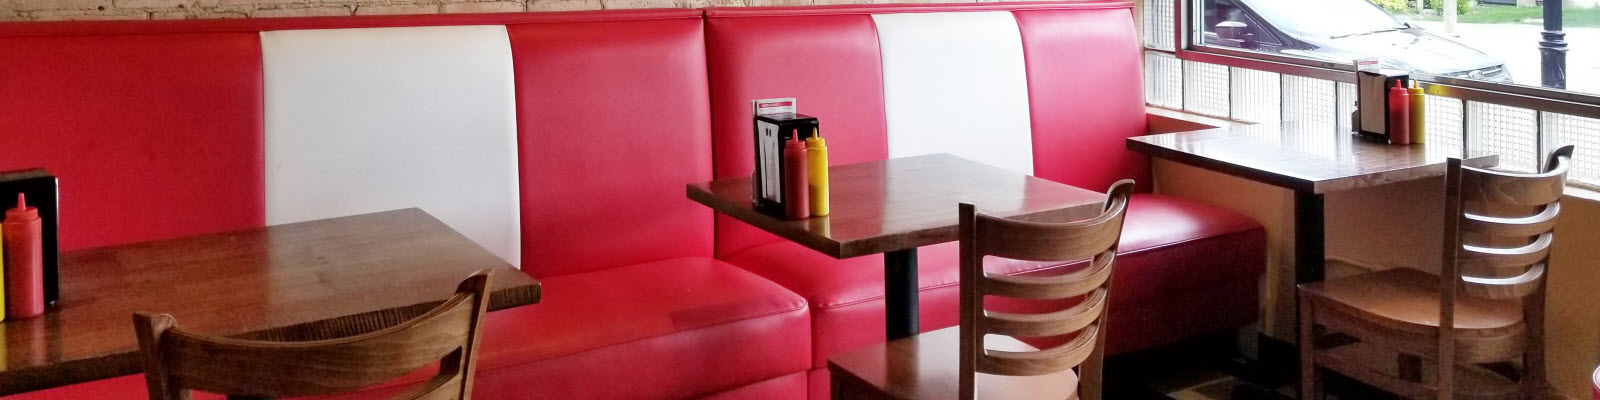 Commercial Restaurant Booth Seating